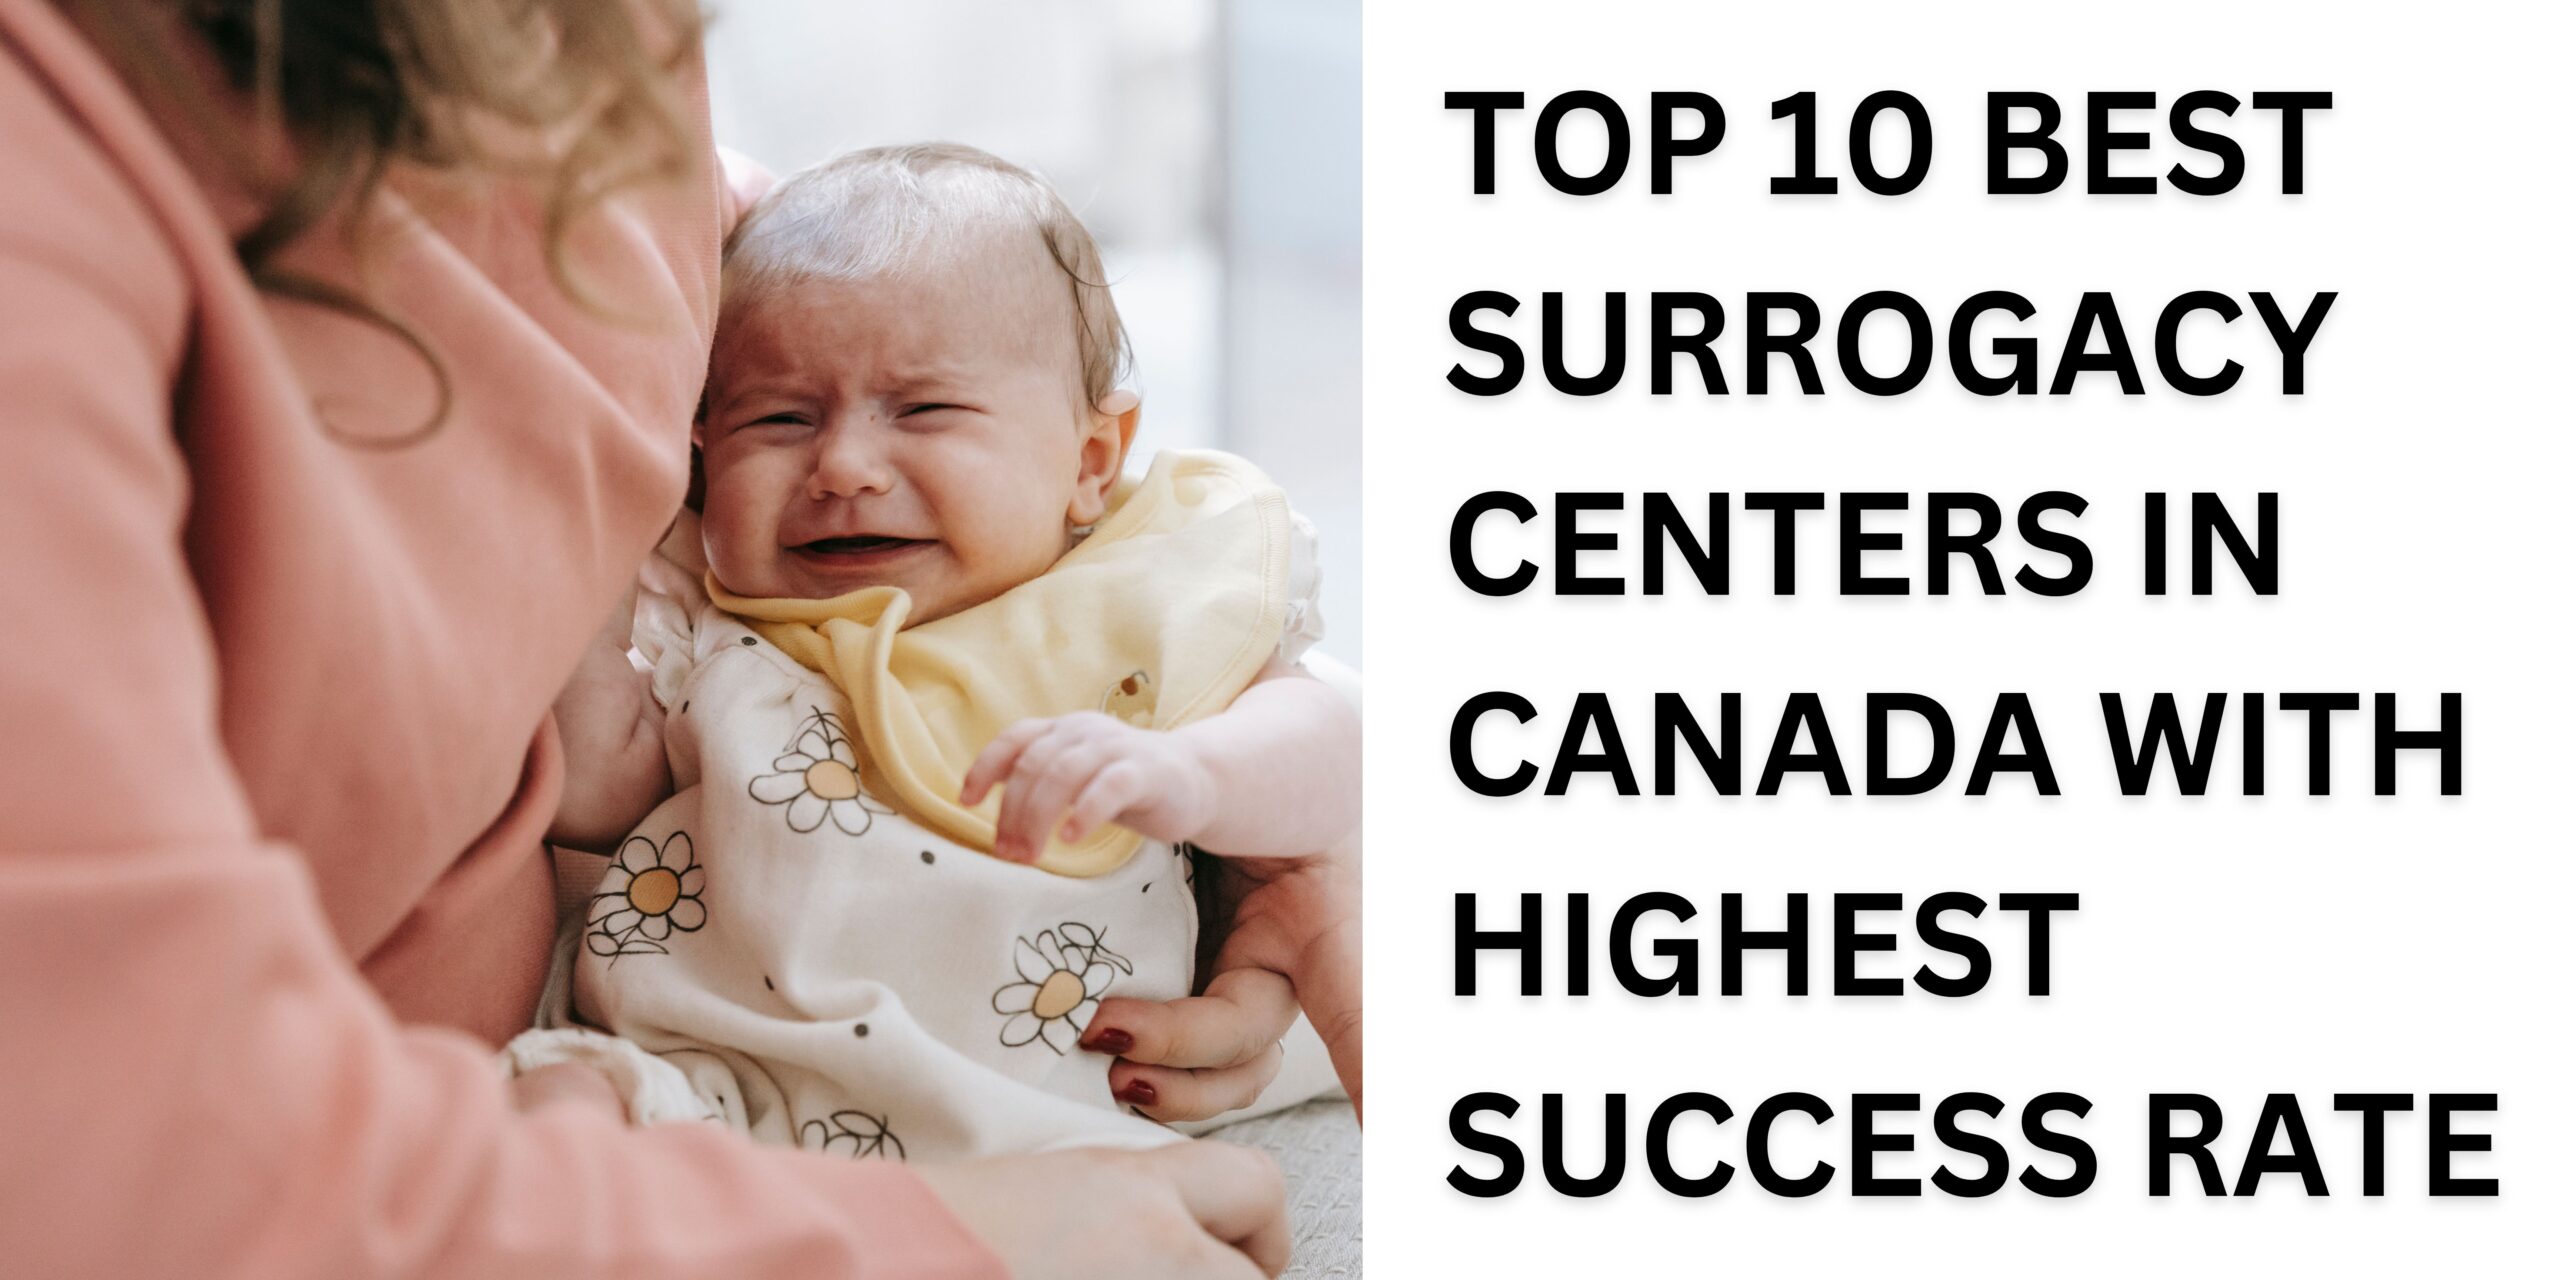 Best Surrogacy Centers in Canada